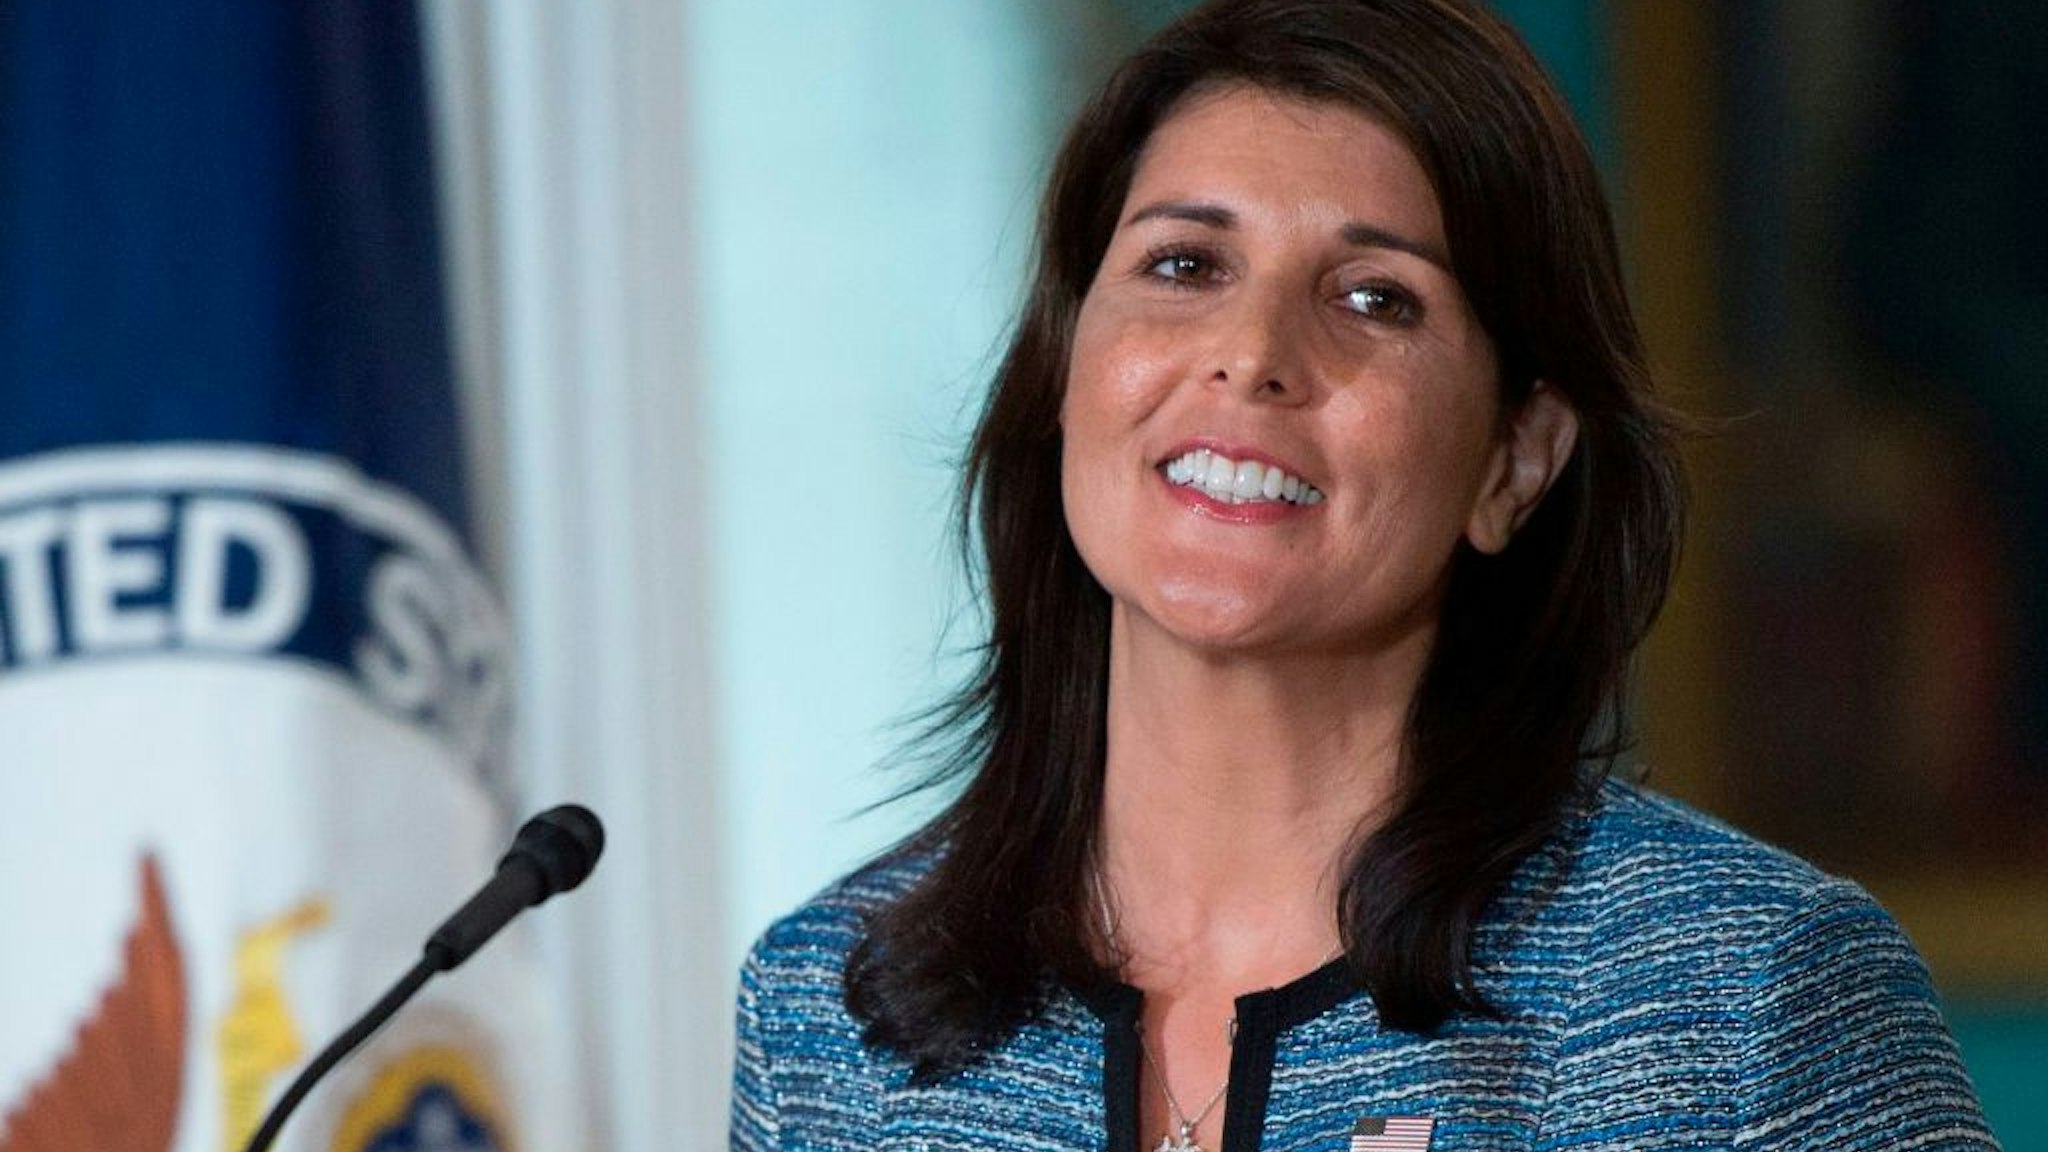 US Ambassador to the United Nation Nikki Haley smiles at the US Department of State in Washington DC on June 19, 2018. - The United States announced that it is withdrawing from the UN Human Rights Council. (Photo by Andrew CABALLERO-REYNOLDS / AFP) (Photo credit should read ANDREW CABALLERO-REYNOLDS/AFP via Getty Images)